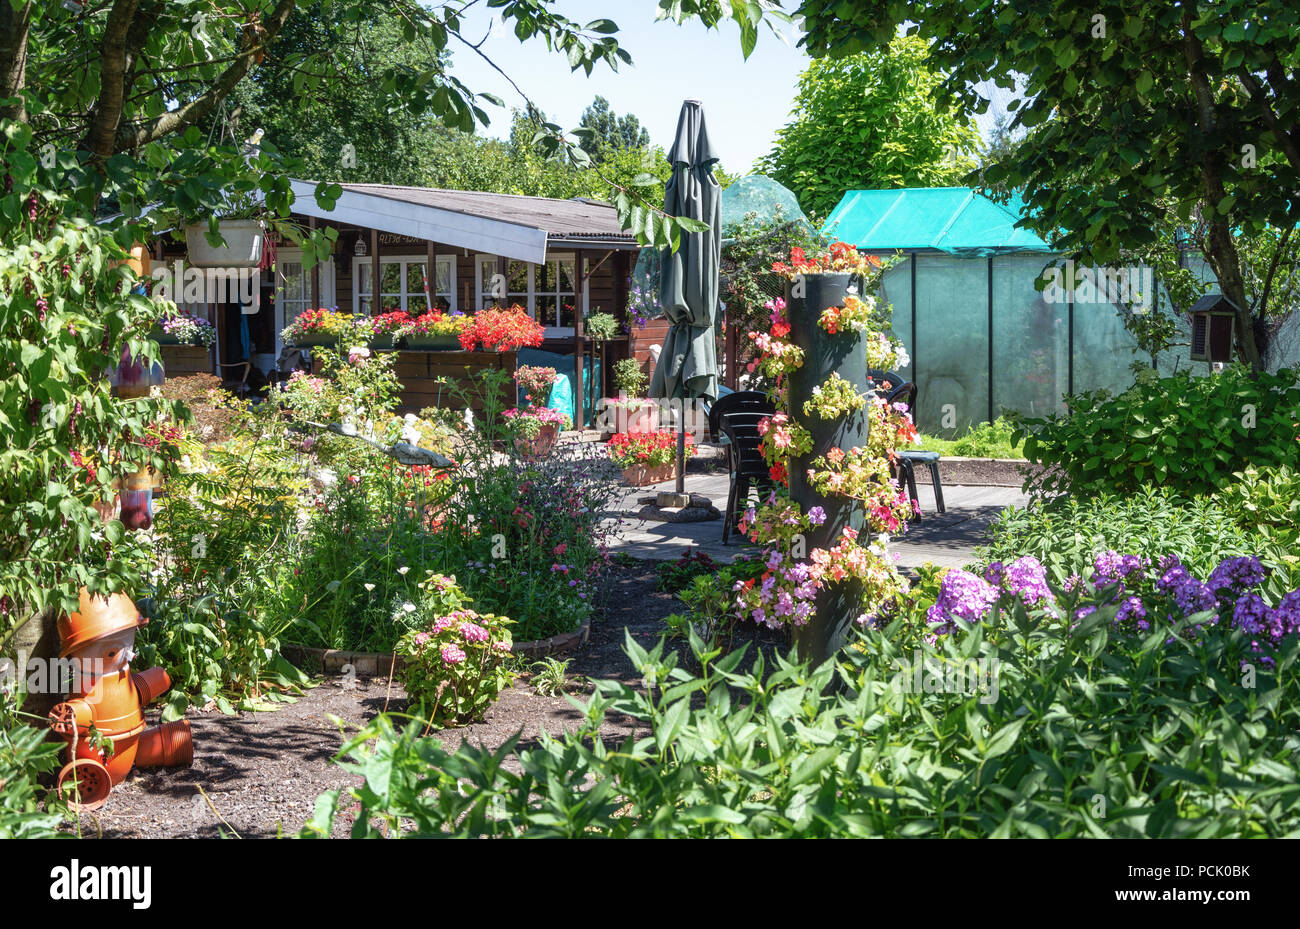 Zaandam, The Netherlands, July 2, 2018: Garden shed and greenhouse surrounded by a beautiful decorative garden in The Netherlands Stock Photo